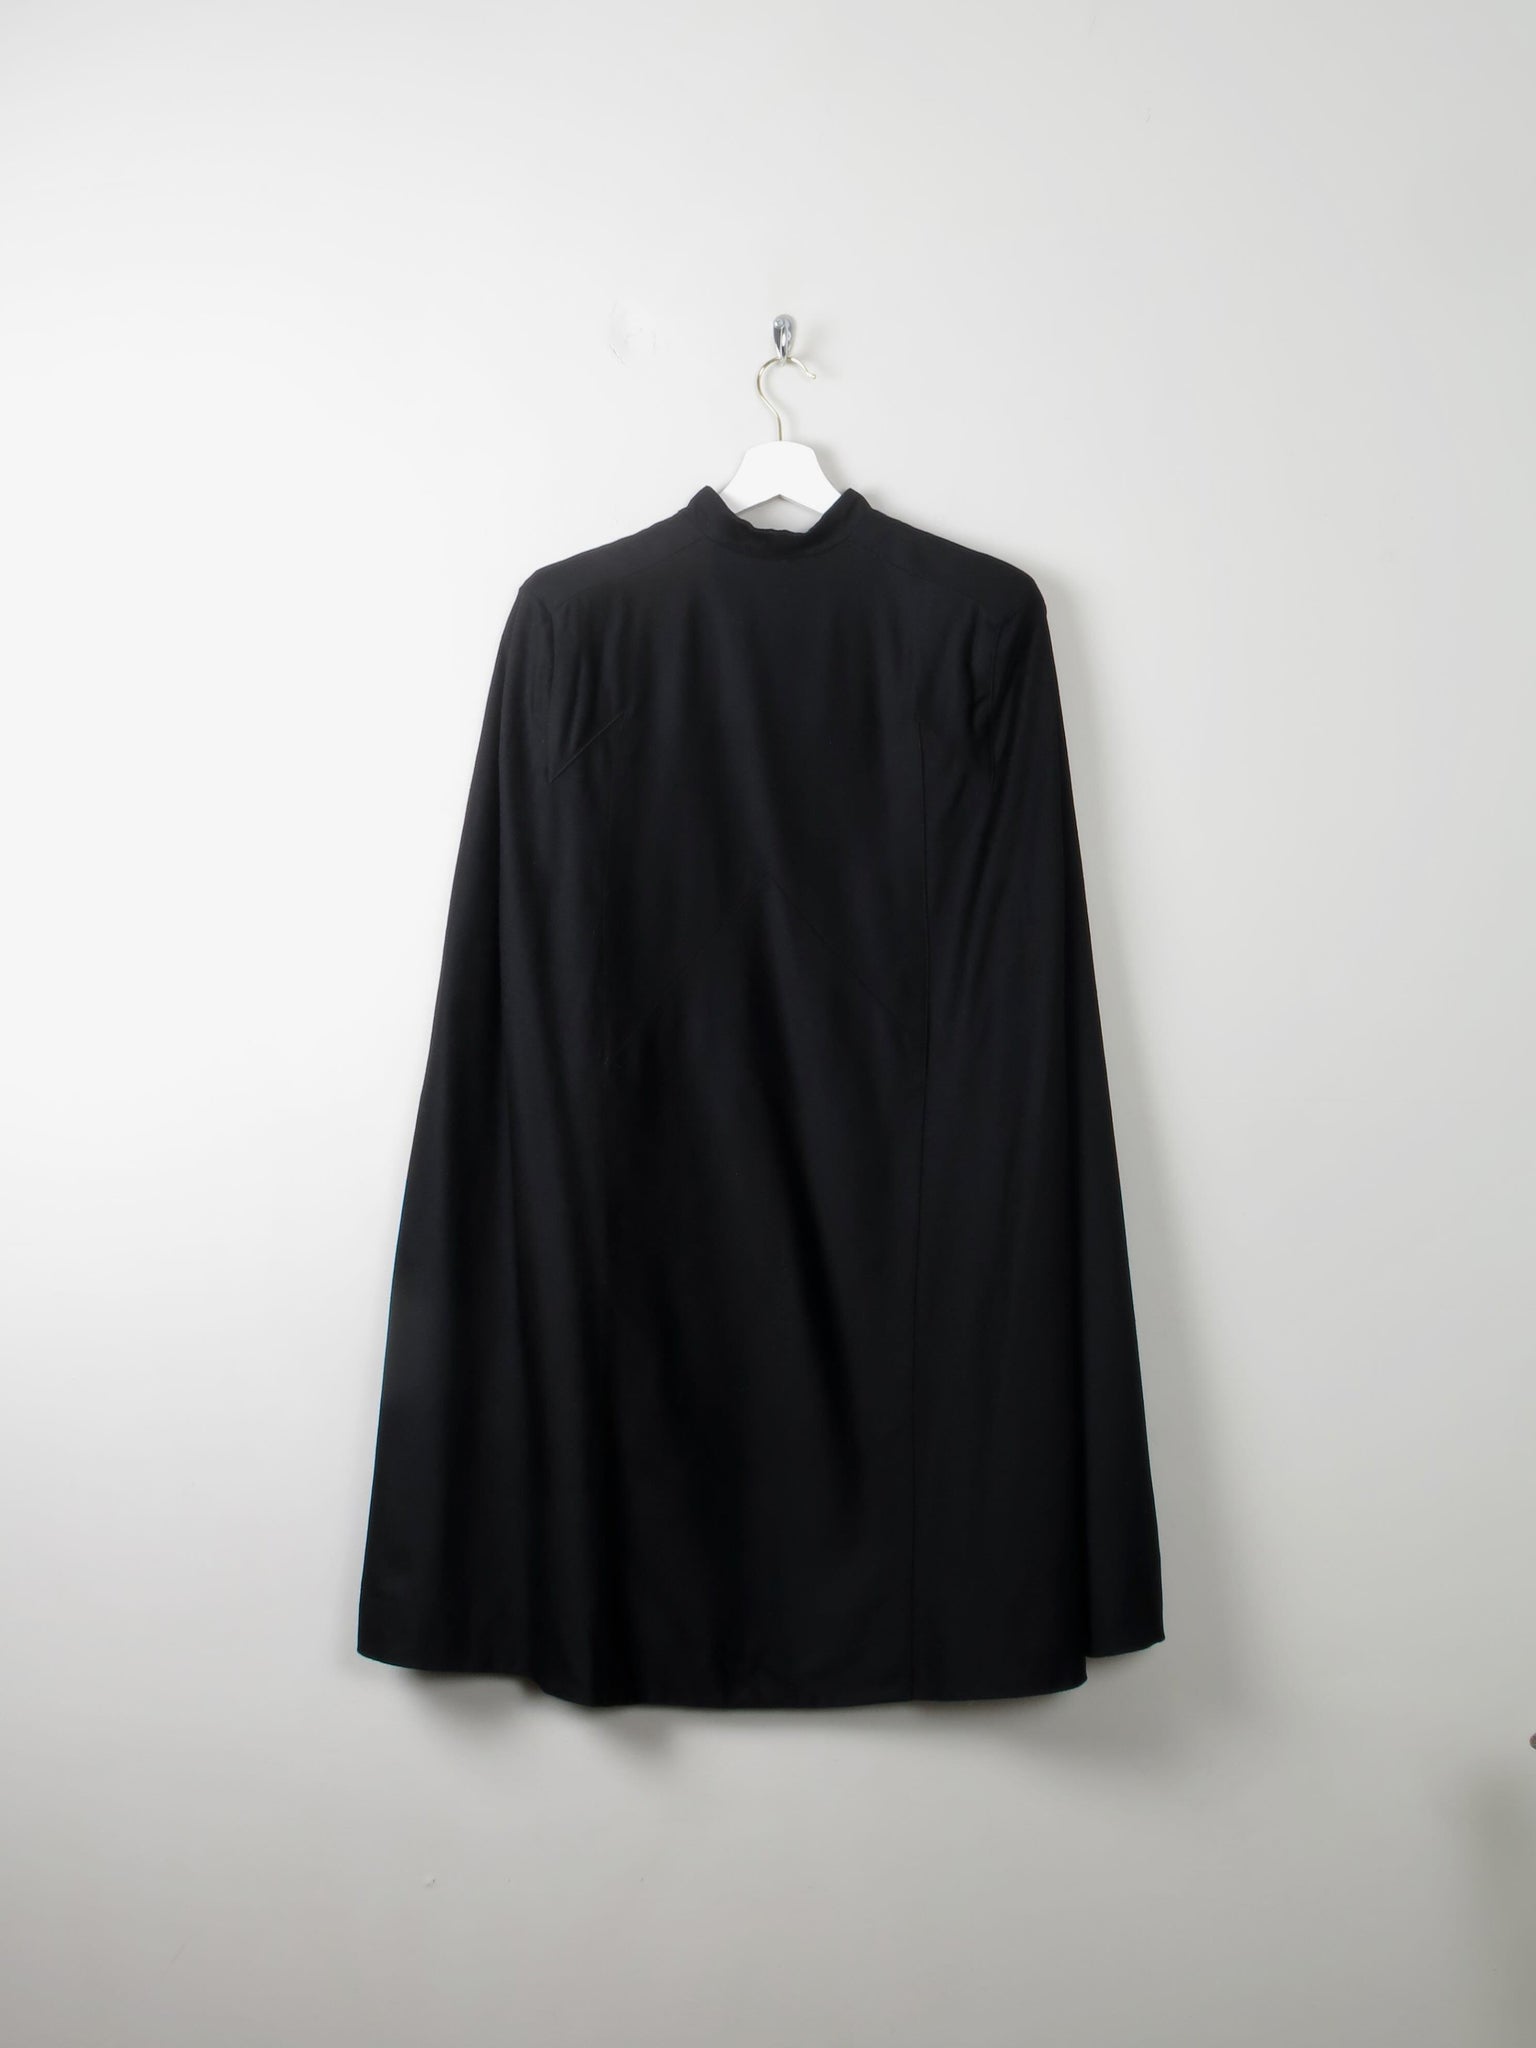 Vintage Black  1940s Cape By Miss Atkins S - The Harlequin